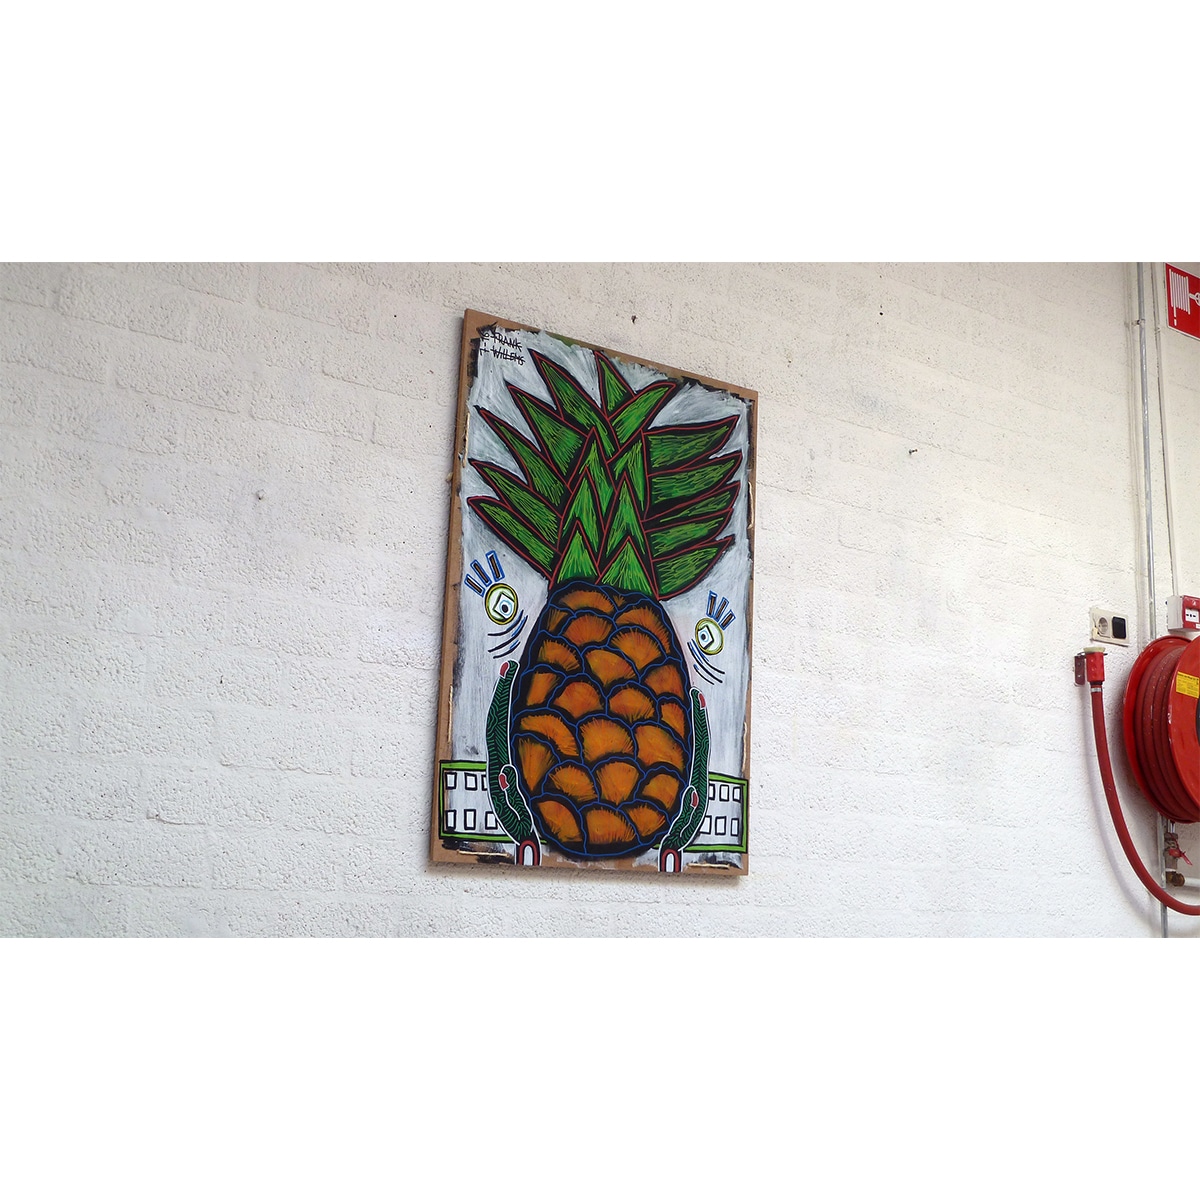 YUMMY PINEAPPLE 01 - Frank Willems